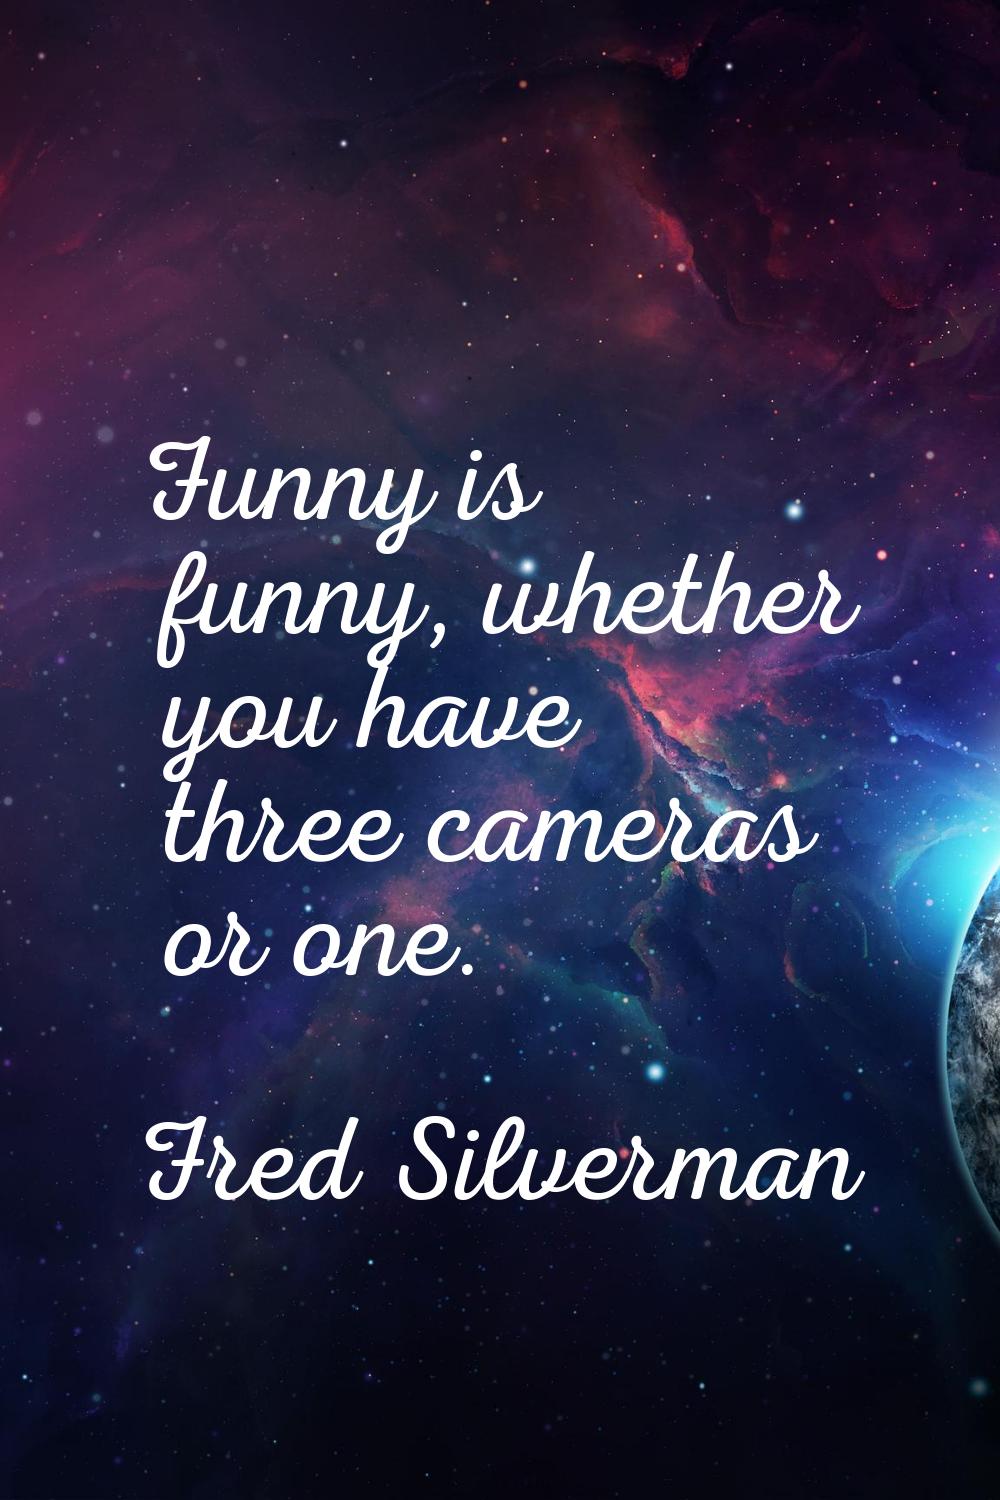 Funny is funny, whether you have three cameras or one.